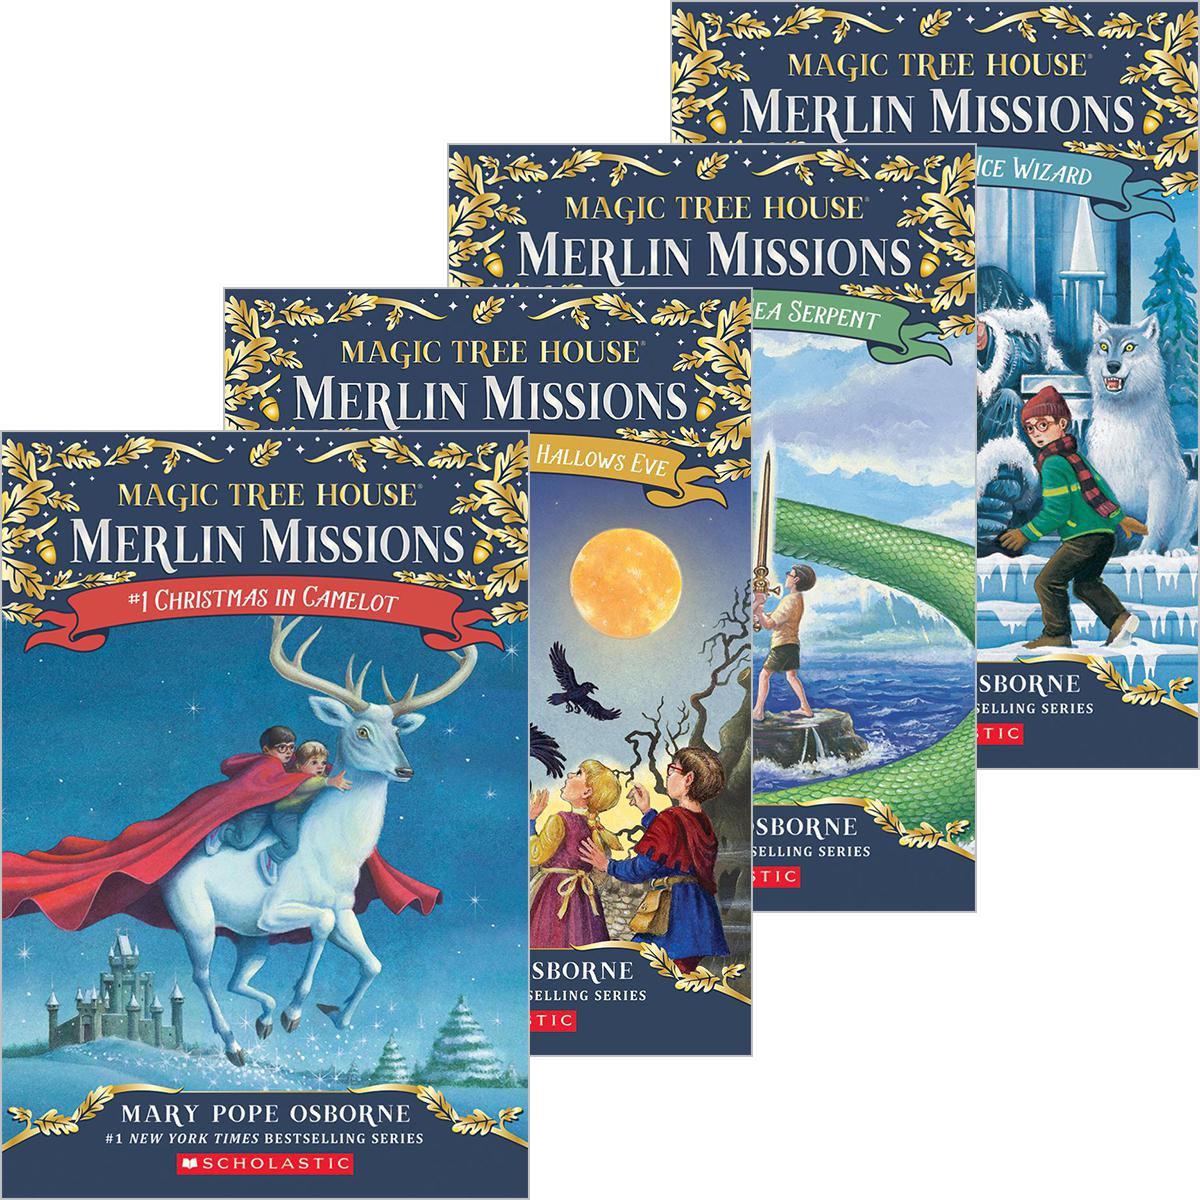  Magic Tree House Merlin Missions Pack 